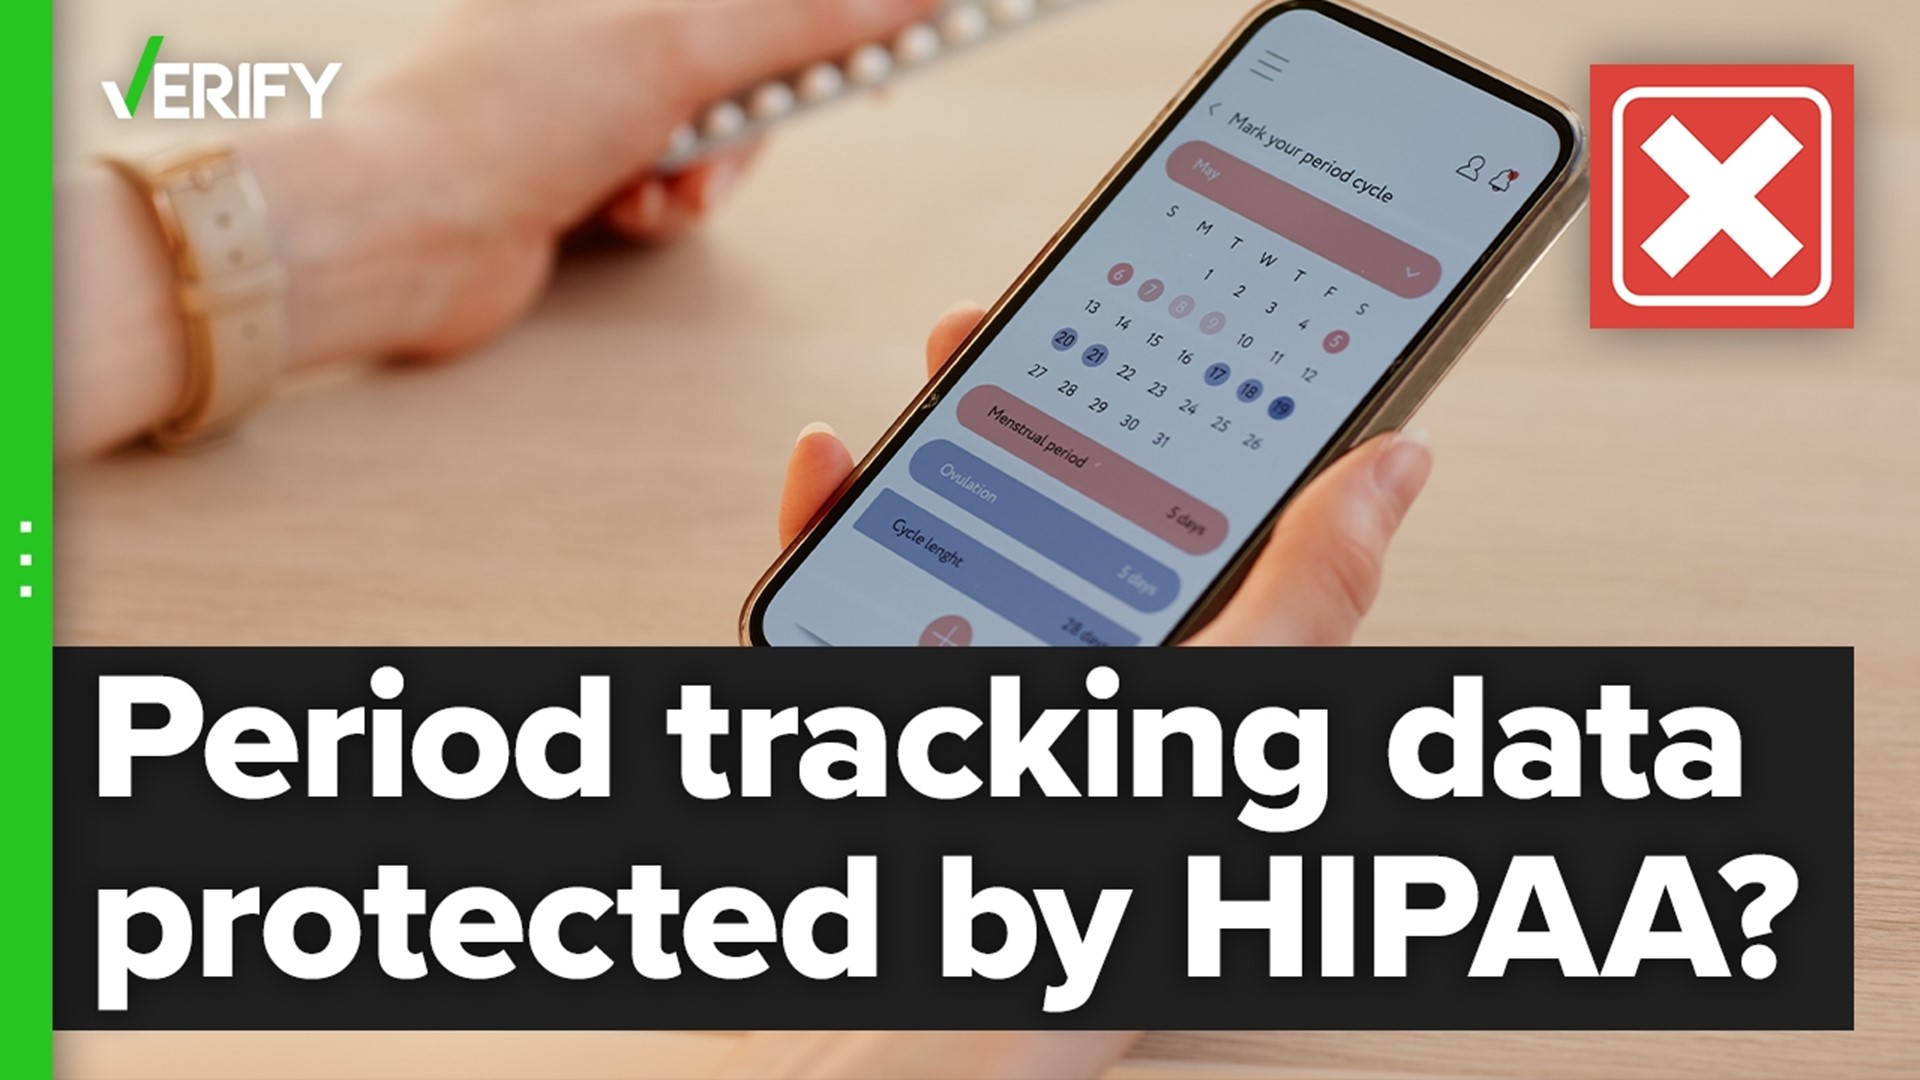 The VERIFY team looked into whether health data from period-tracking apps protected under HIPAA.